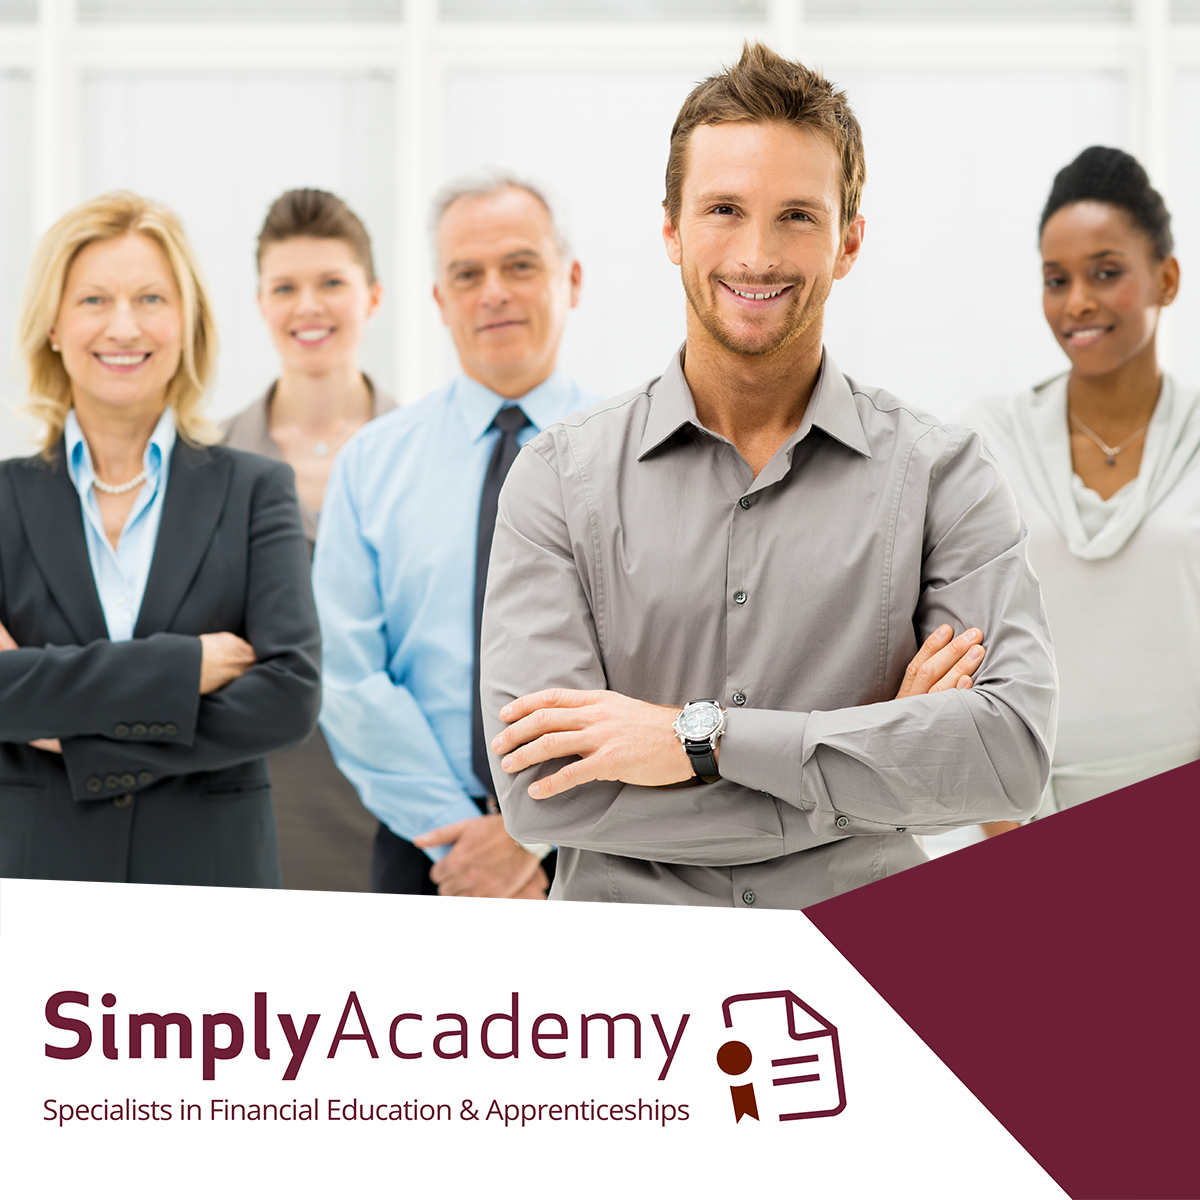 Are you considering an #apprenticeship programme for your #Financial Services company? Simply Academy can help you with planning and delivering #training, applying for Government funding and recruiting your ideal candidate. Learn more at simplyacademy.com/apprenticeships